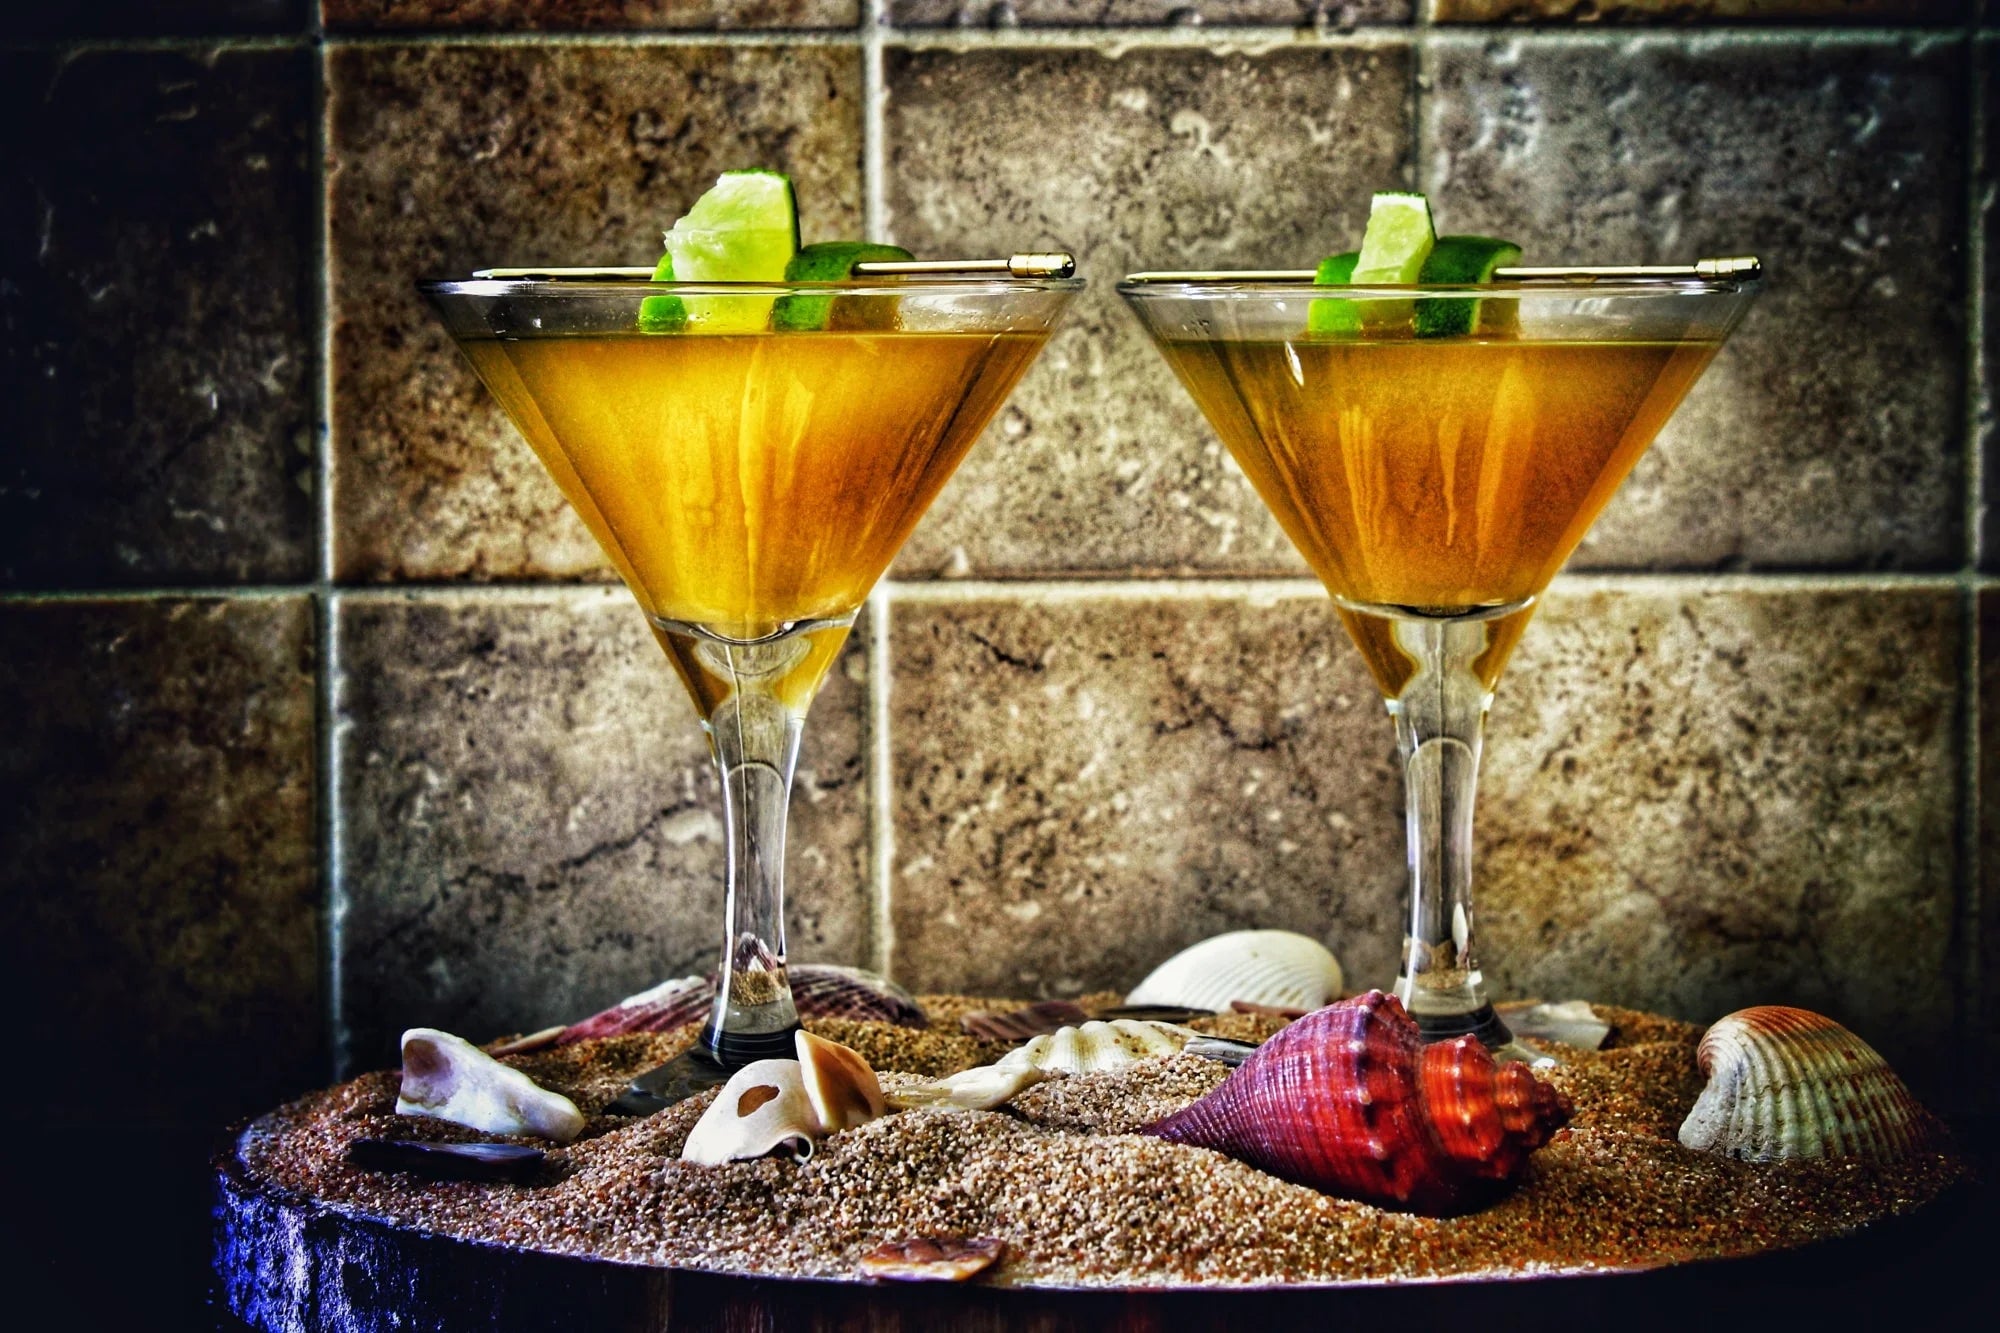 Pineapple Daiquiri made using Swan Knight Distillery golden spiced rum in 2 martini glasses on a bed of sand and shells